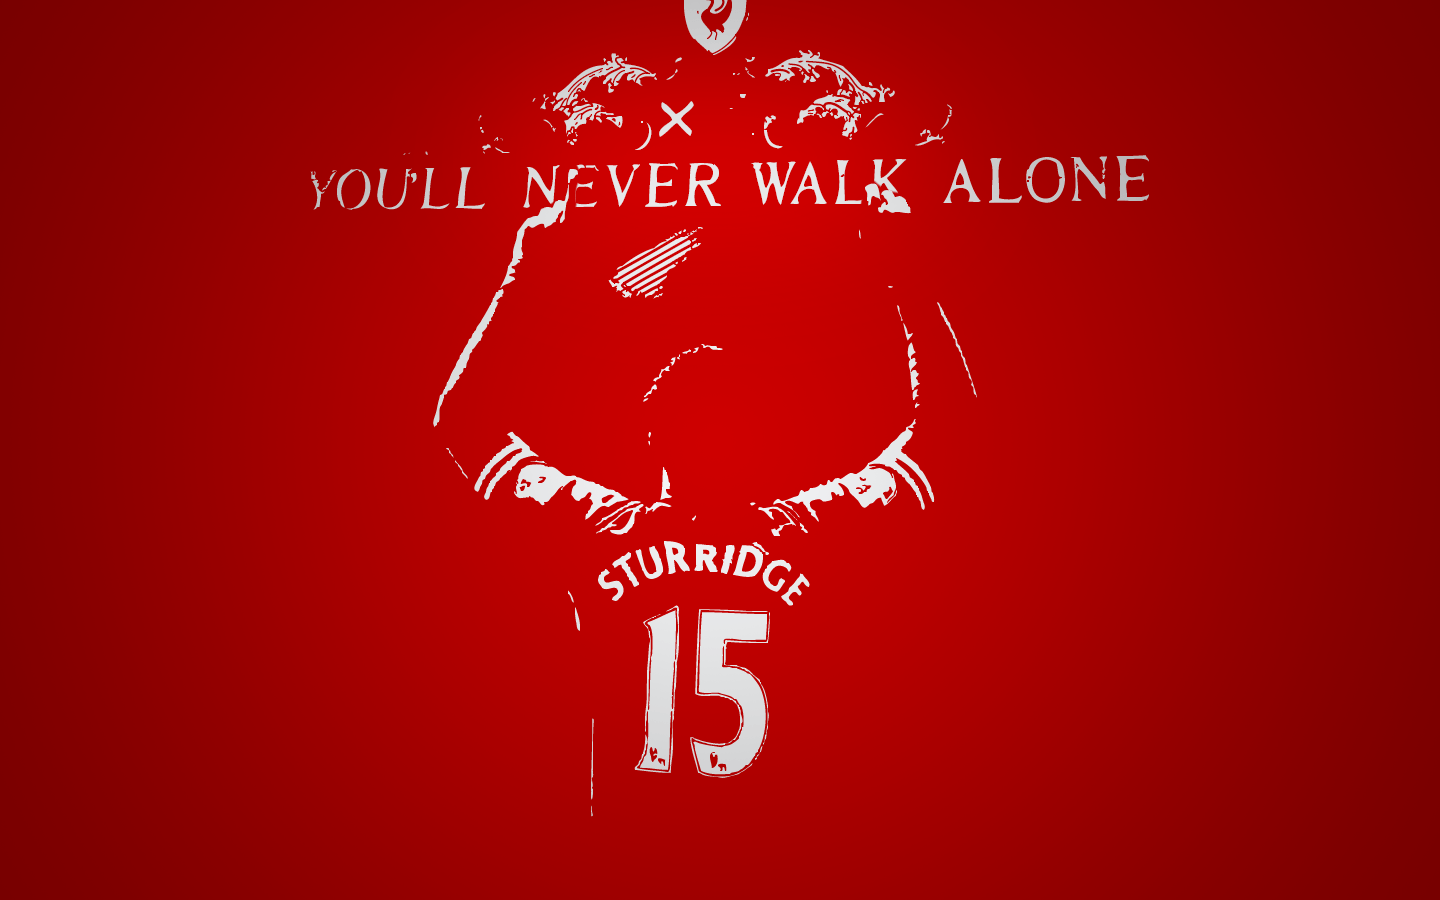 Sturridge wallpaper I made after todays game